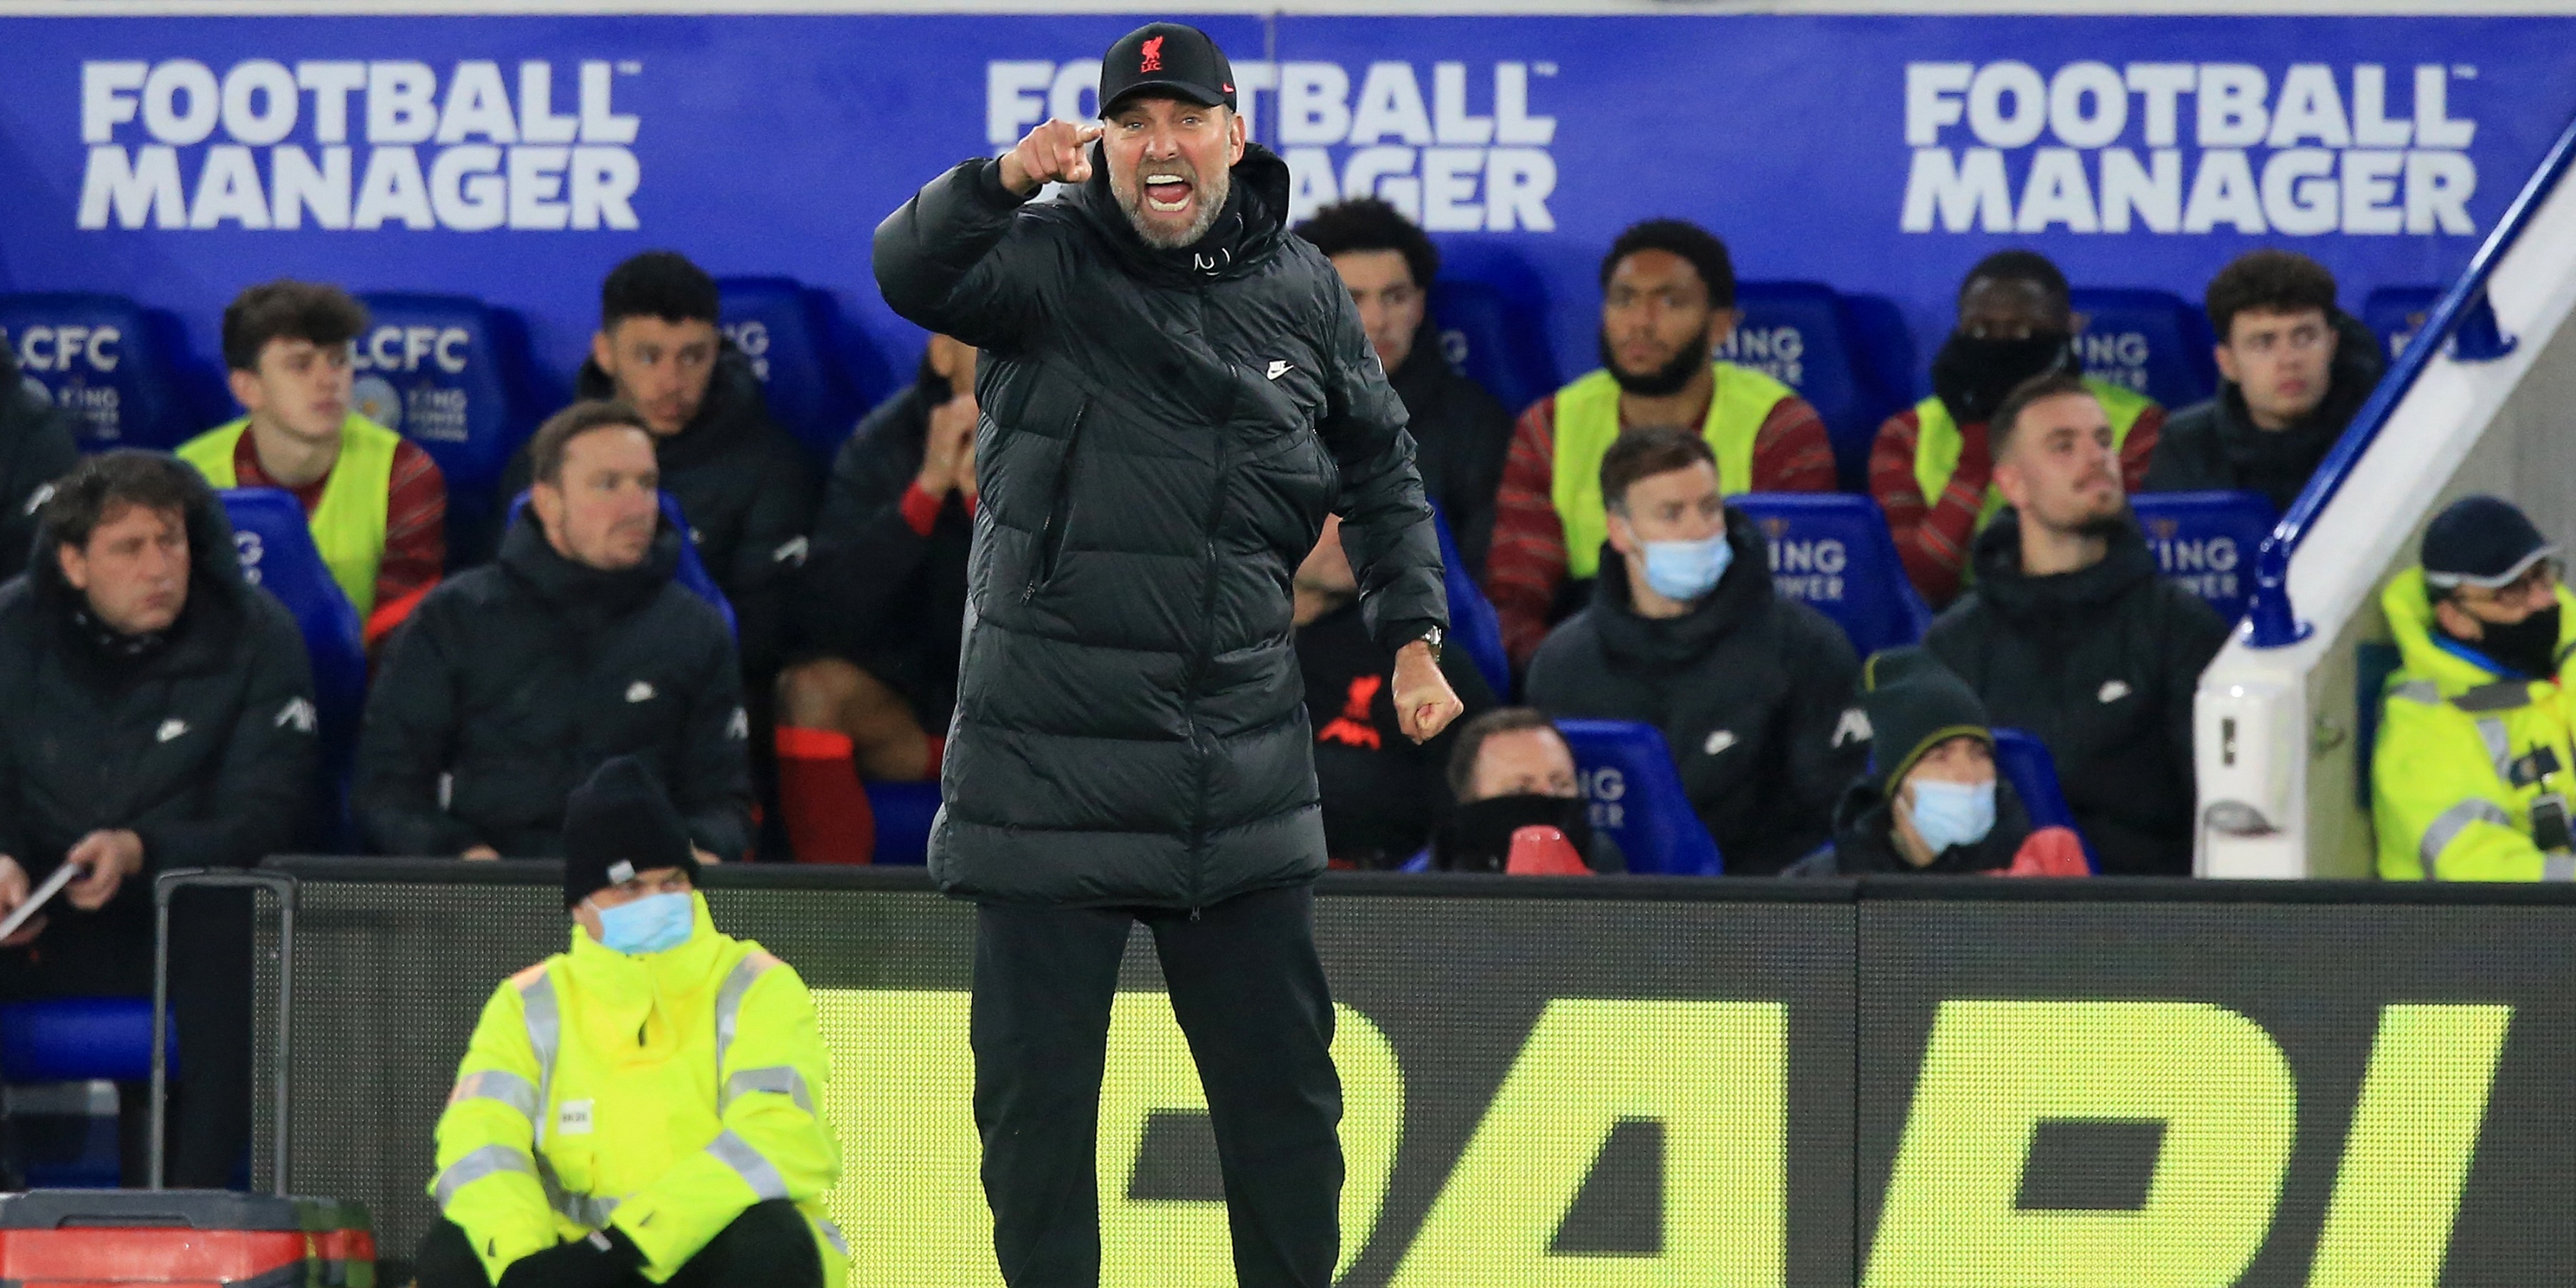 ‘I’d be hating’ – Pundit weighs in on ‘tradition’ Jurgen Klopp will rue as Reds face 11-point mountain to climb